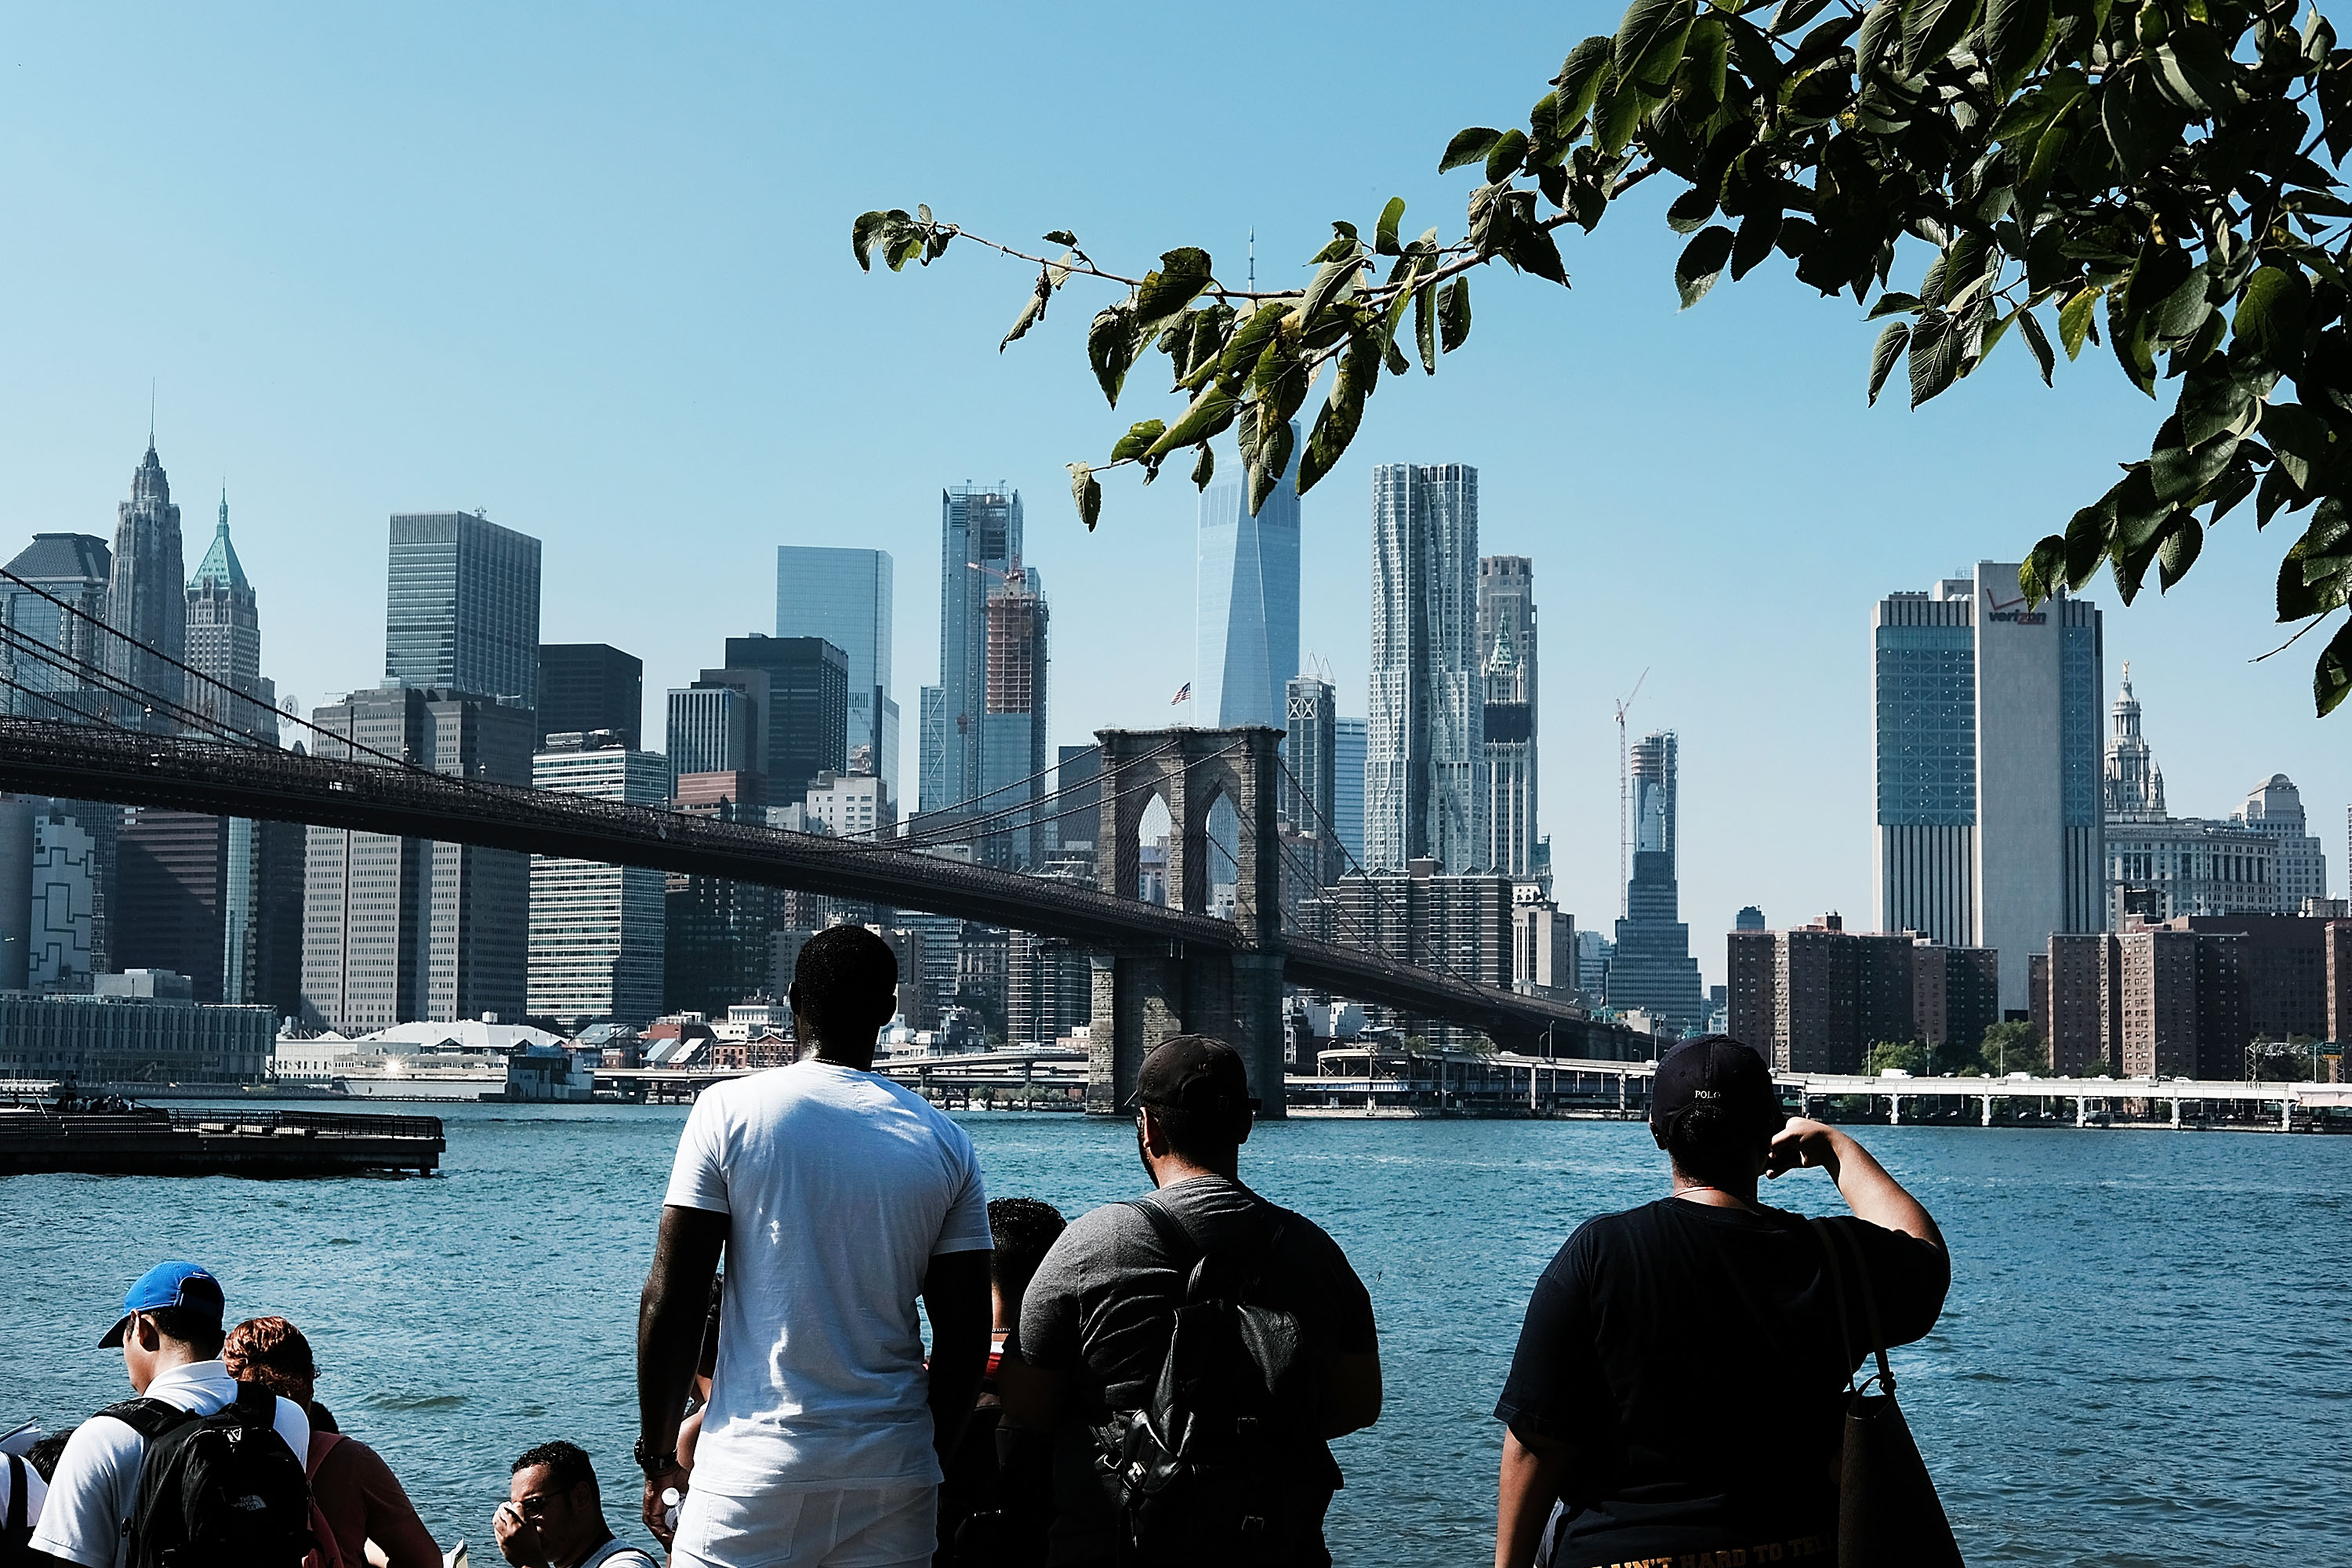 People look out at the East River on an unseasonably warm afternoon on September 25, 2017 in New York City. Despite officially entering fall last week, New York City and much of the East Coast has experienced unseasonably warm weather over the past few days. (Photo by Spencer Platt/Getty Images)